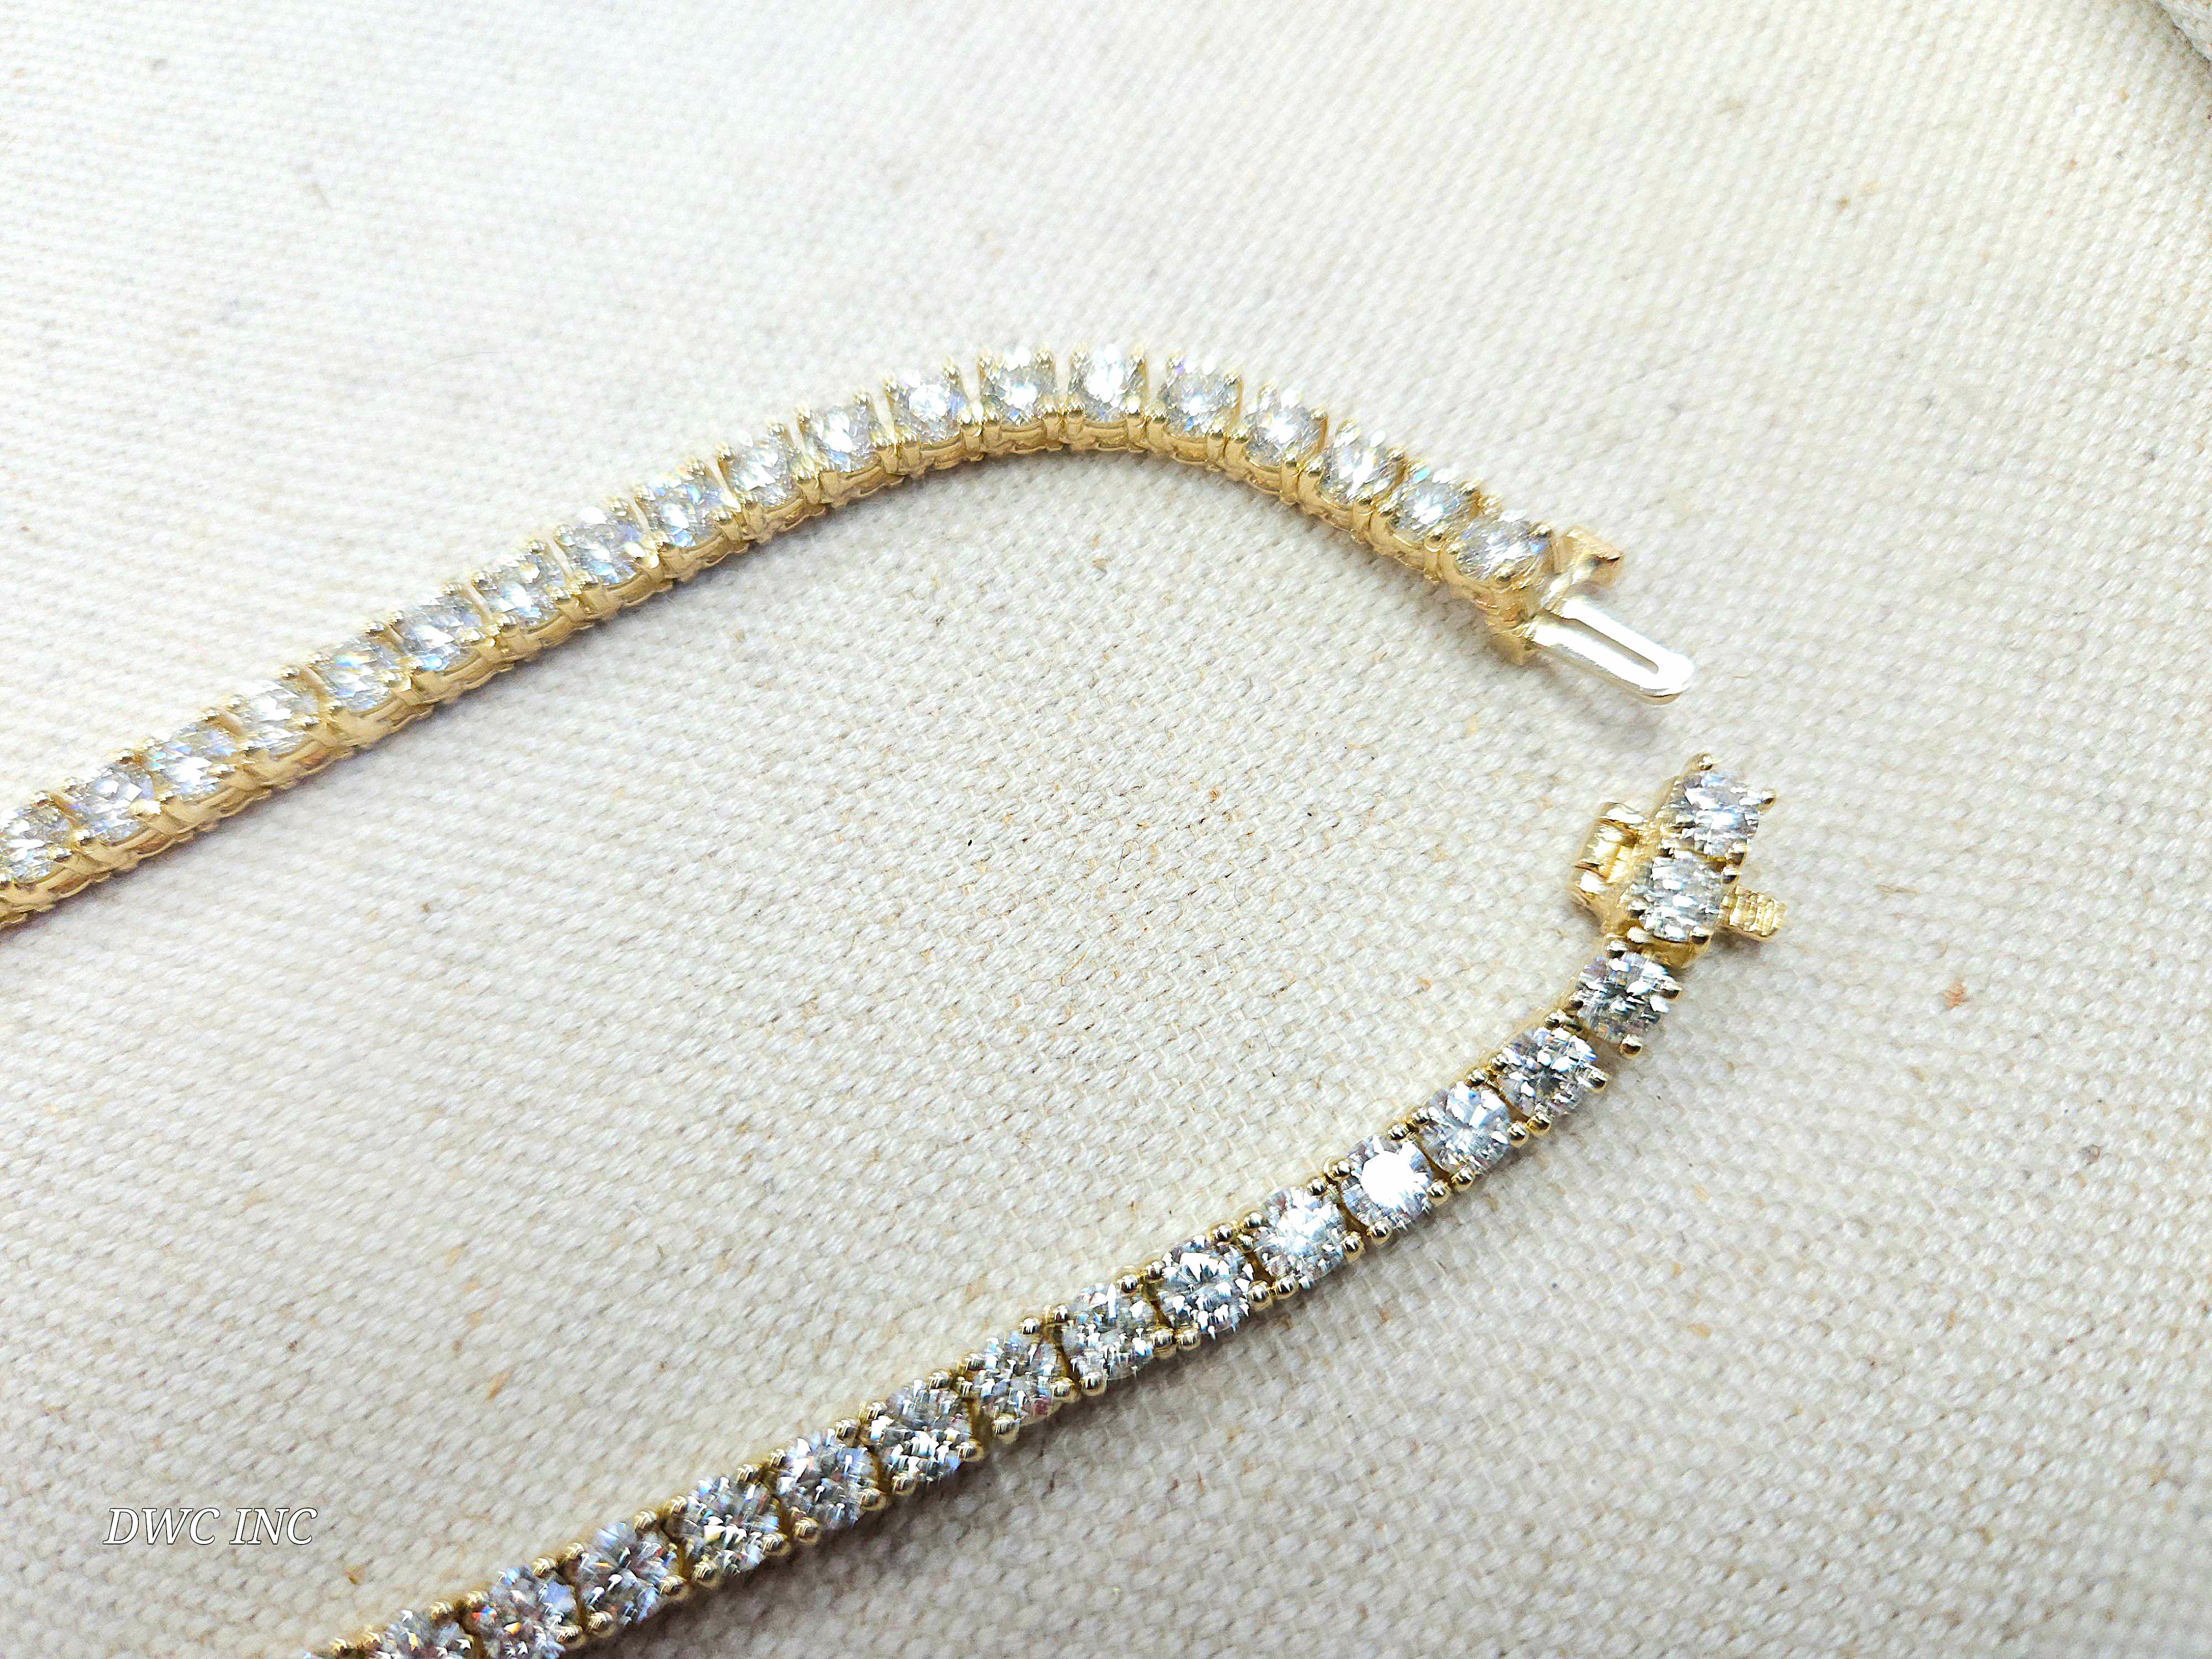 High beautiful quality tennis necklace, round-brilliant cut white diamonds clean and Excellent shine. 
14k yellow gold classic four-prong style for maximum light brilliance. 
20 inch length. Average Color I, Clarity VVS-VS, 3.6 mm wide.

*Free